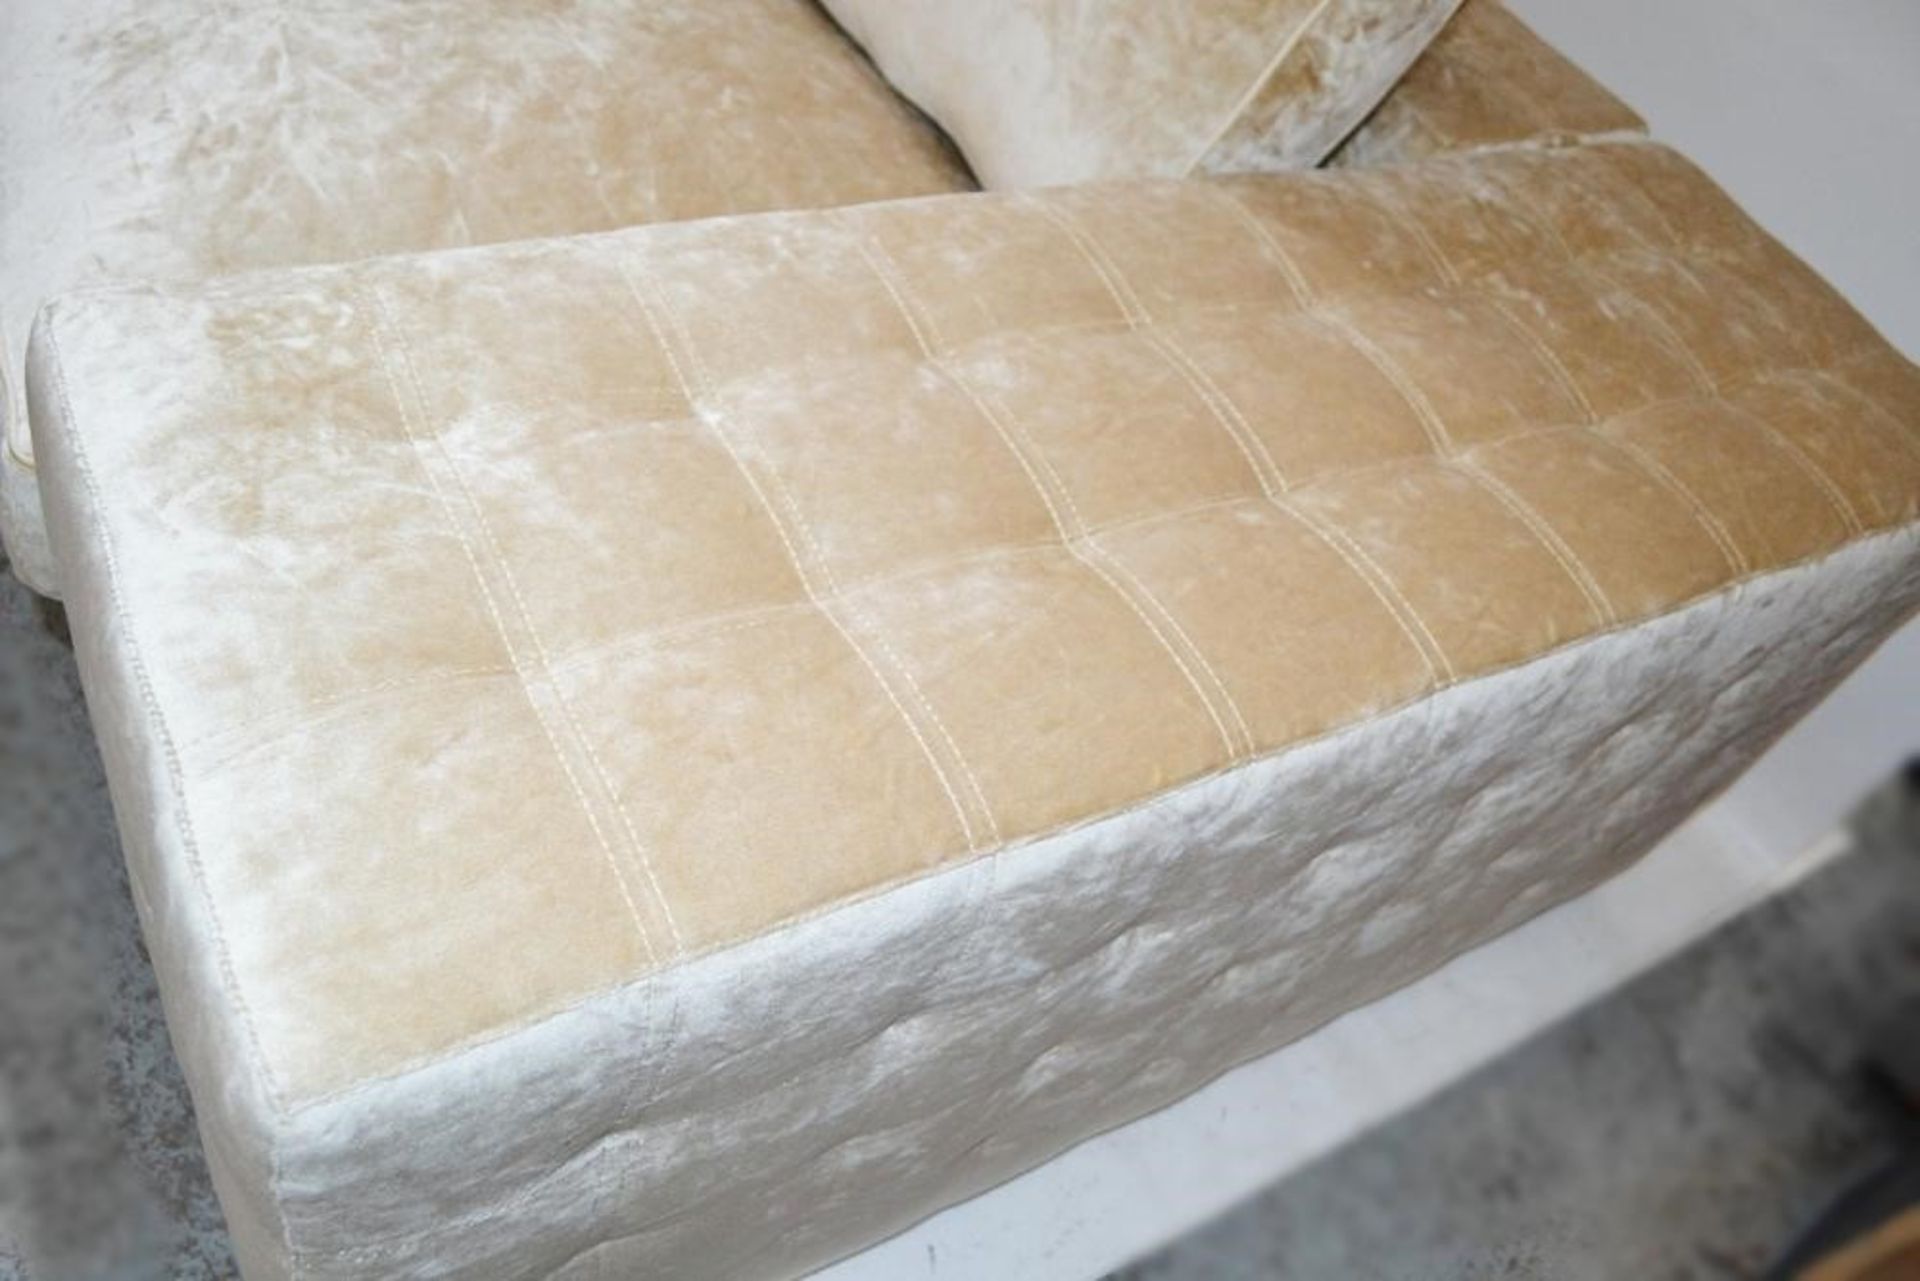 1 x GIORGIO "Sayonara" 3-Seater Sofa In An Opulent Champagne Chenille Upholstery - Ref: 4711347 NP1/ - Bild 7 aus 8